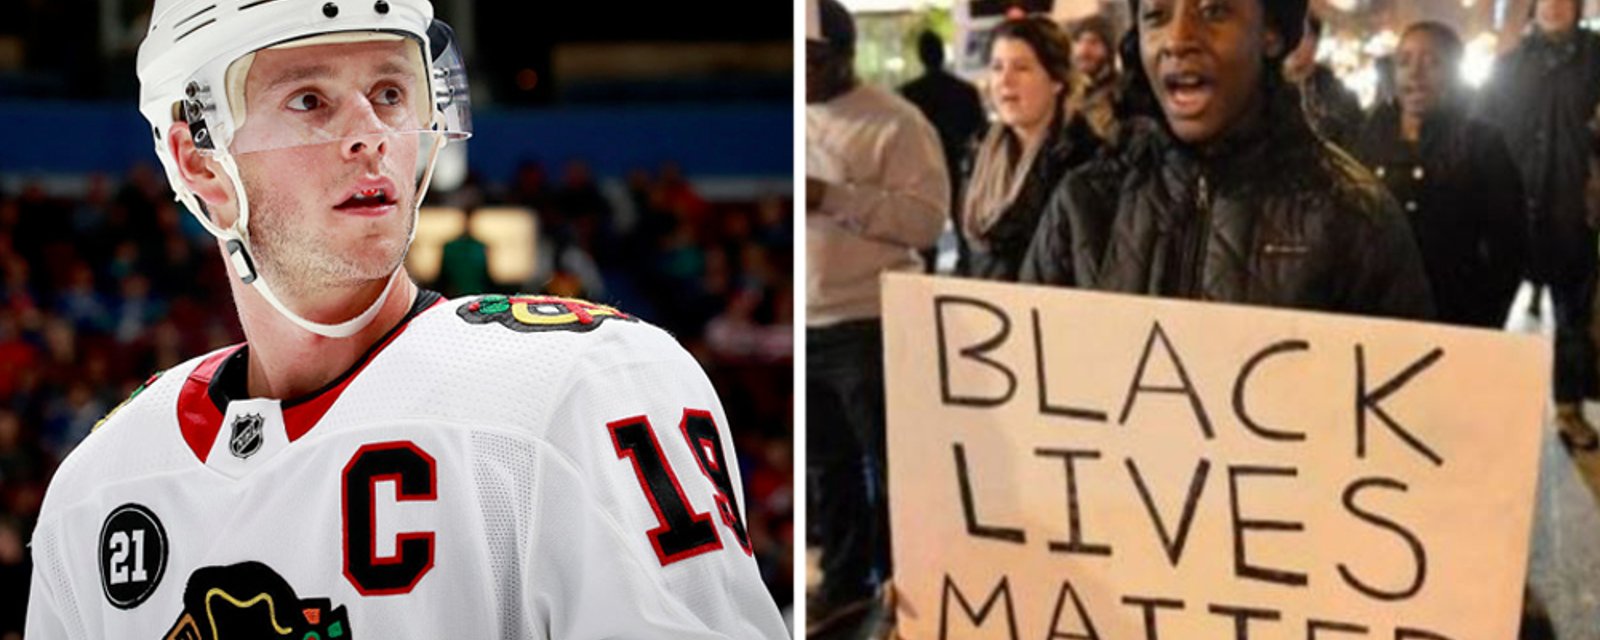 Jonathan Toews to white people: “Open your eyes“